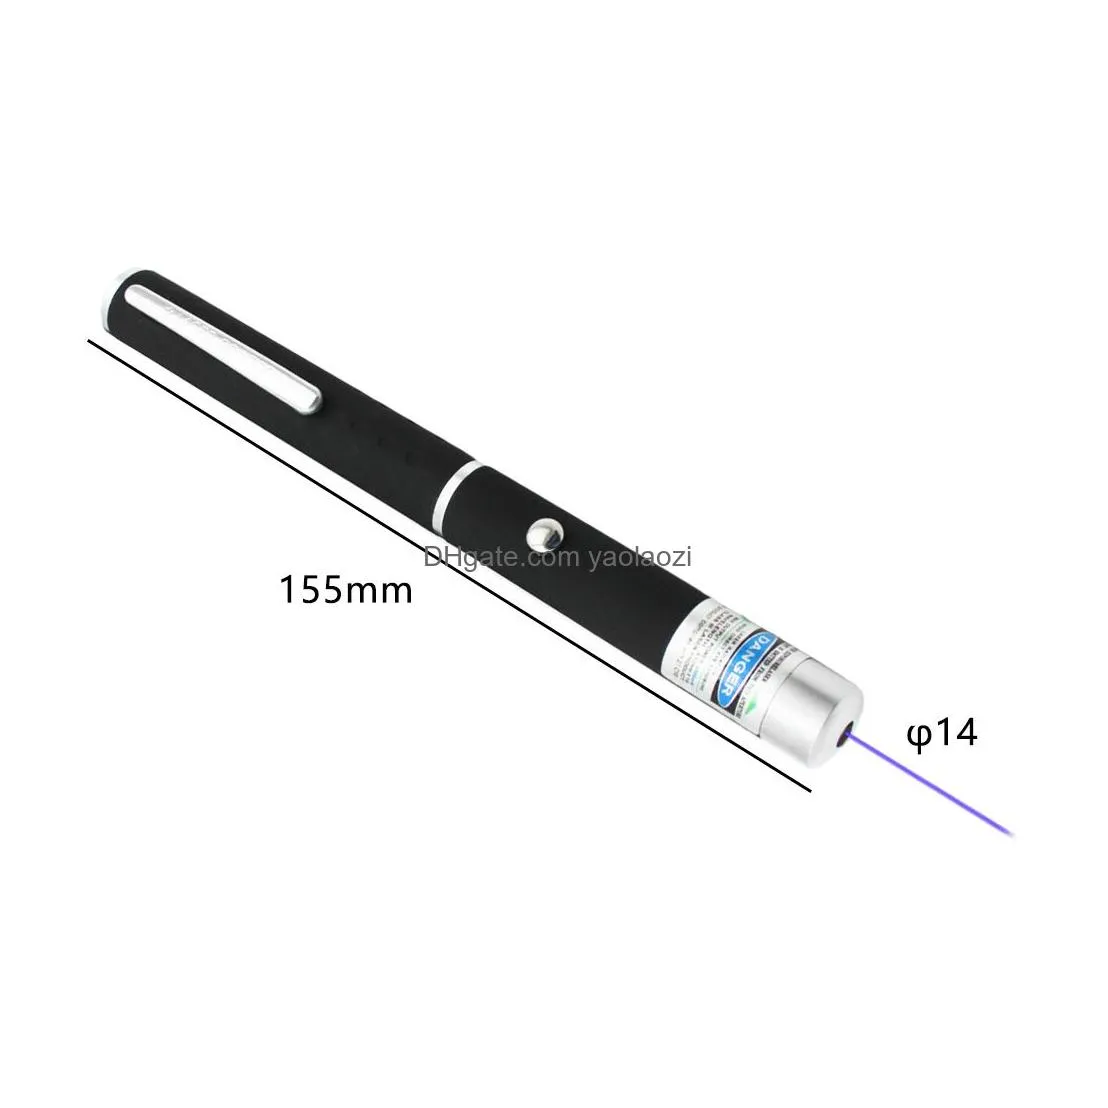 5mw 532nm green laser pen powerful laser pointer presenter remote lazer hunting laser bore sighter without battery9916307